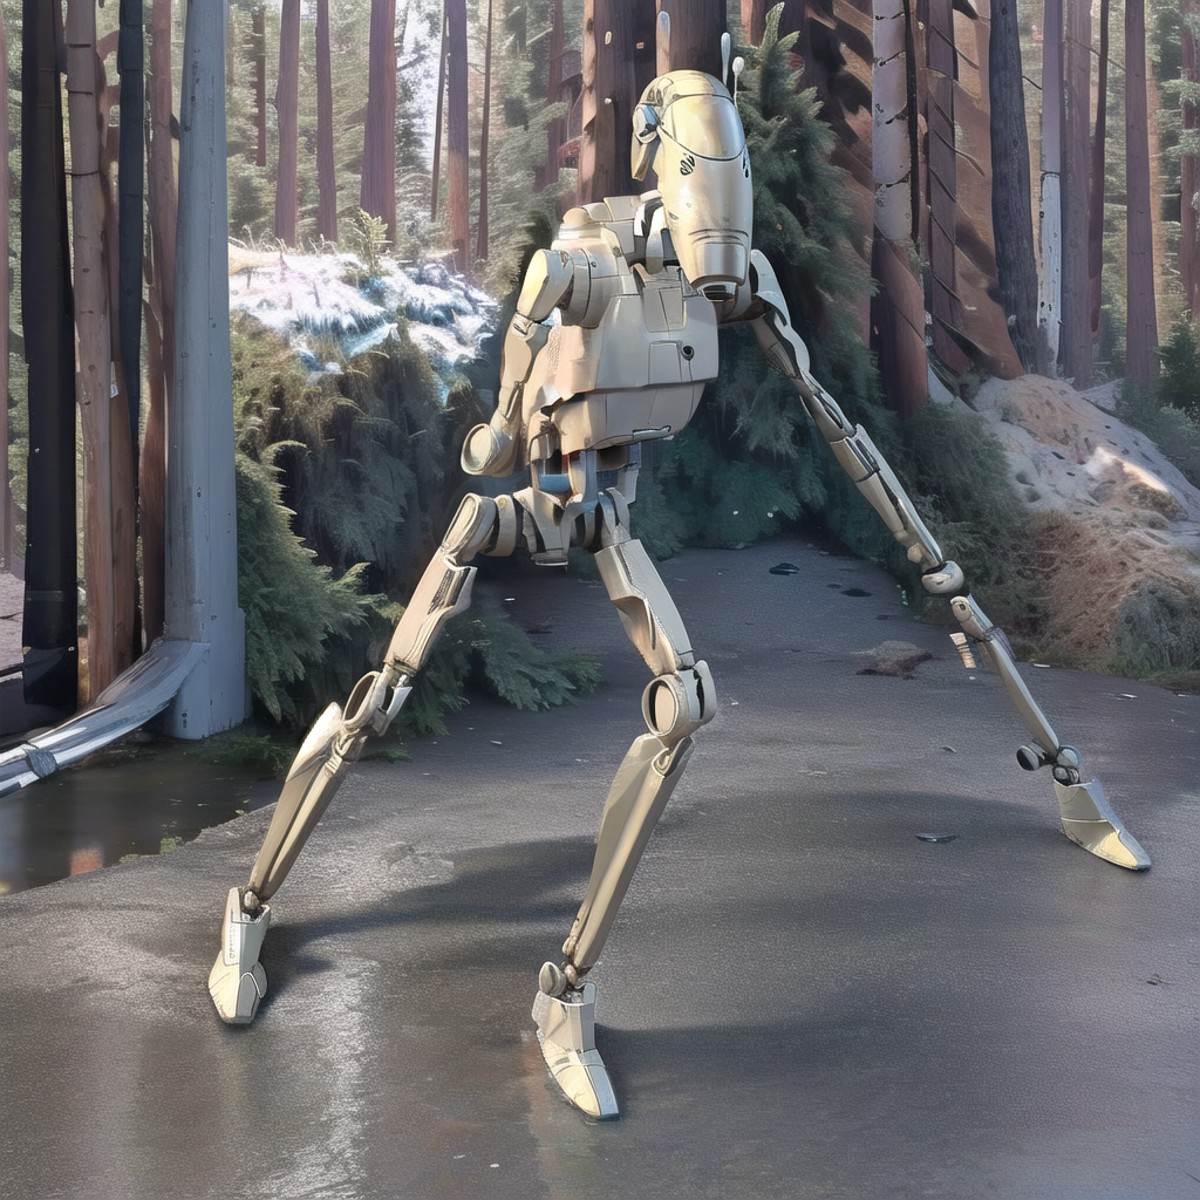 non-humanoid battle-droid B1 battle droid, B1 running, solo, action, no humans, robot, mecha, face facing viewer, forest b...